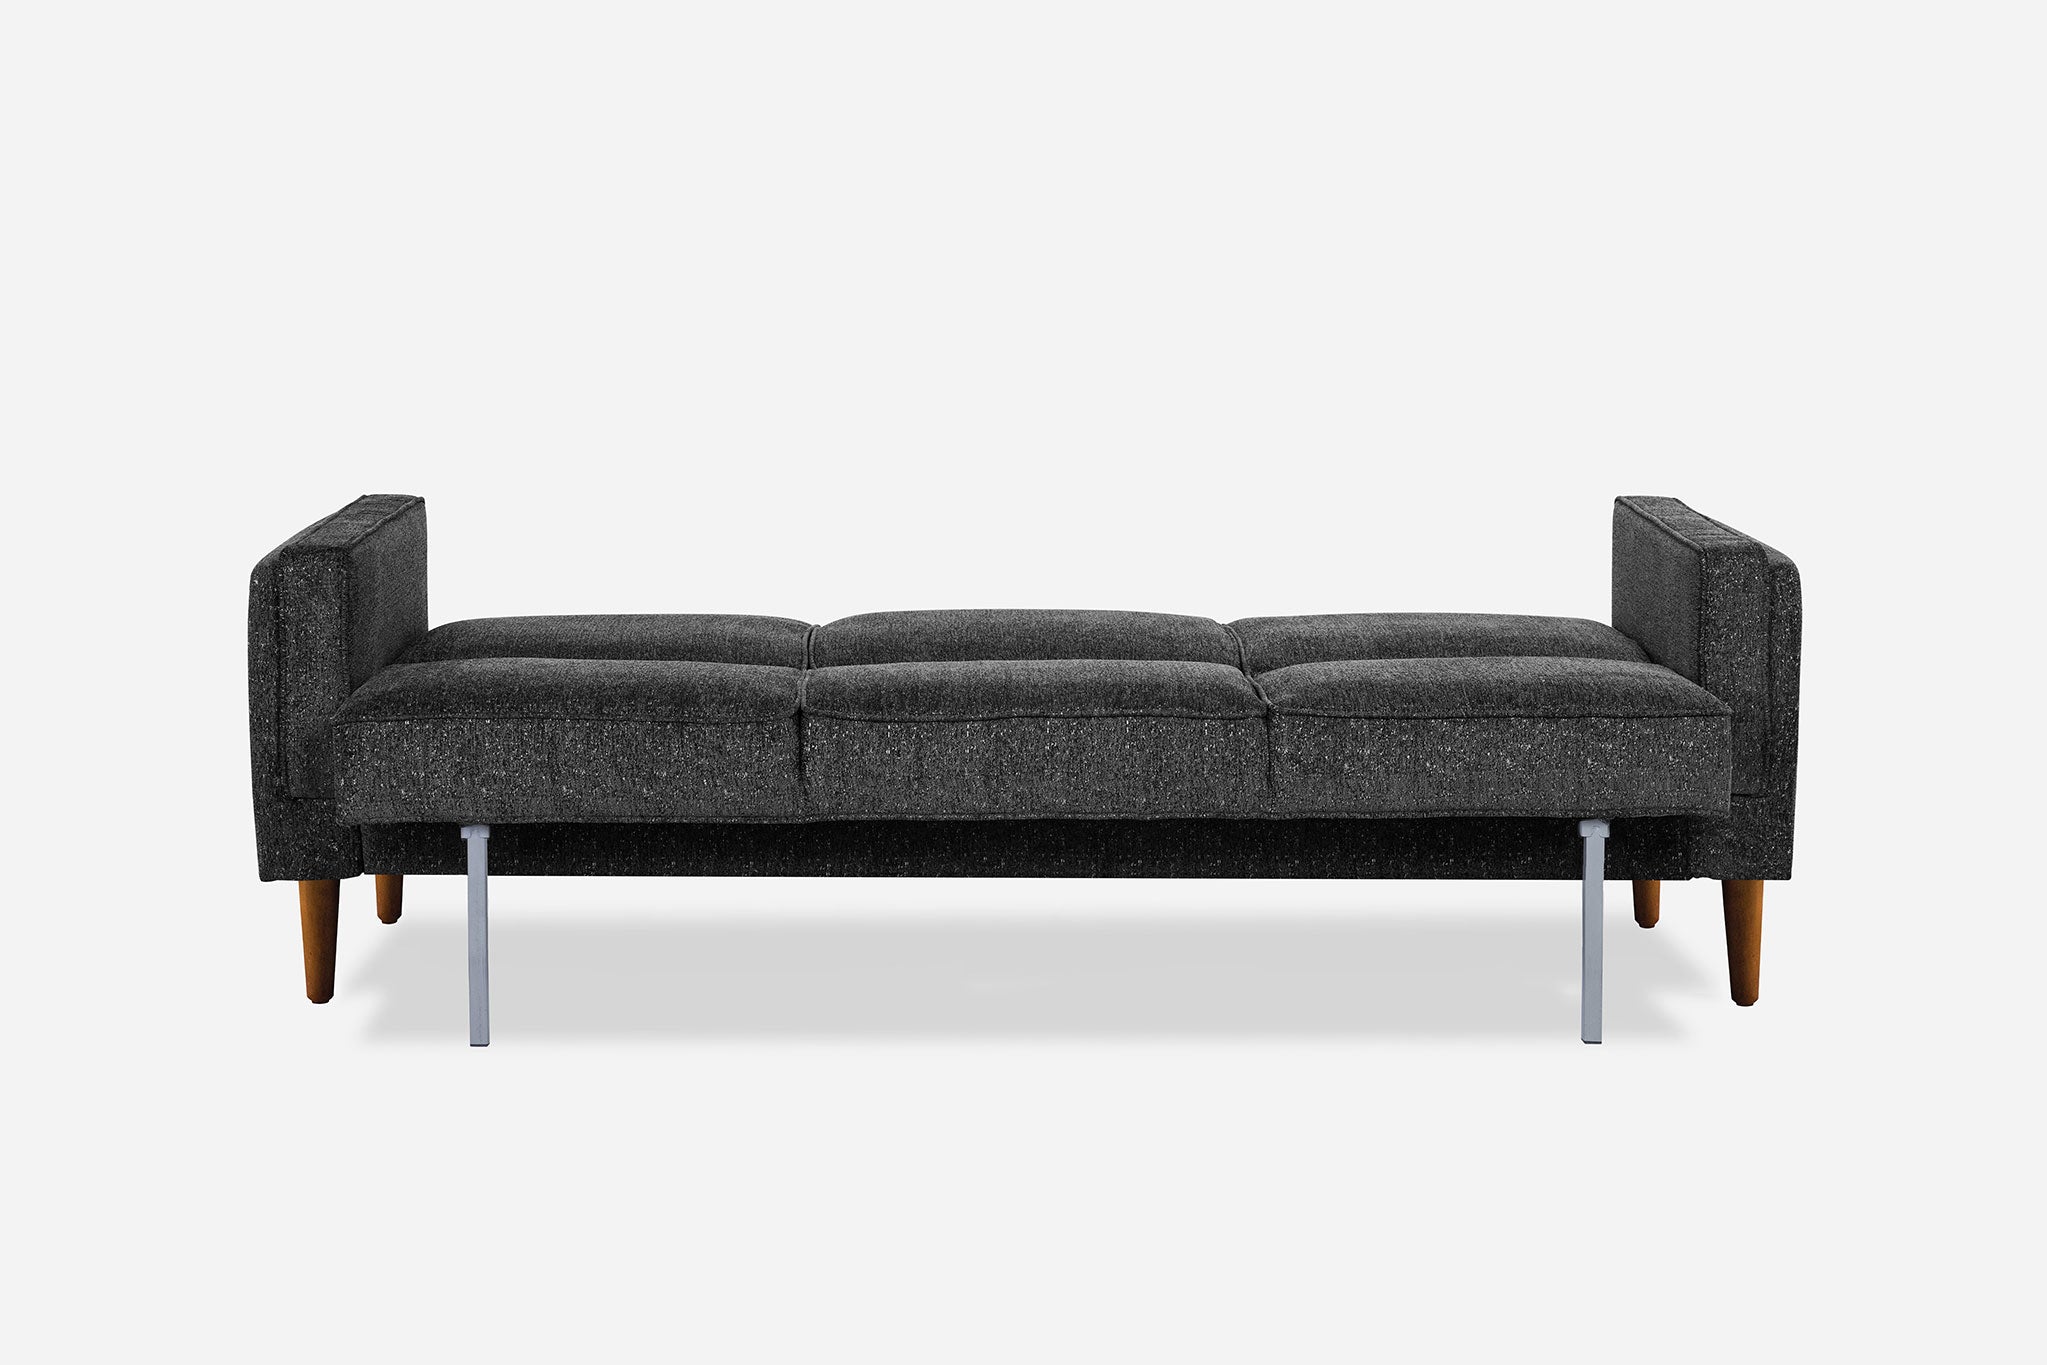 back view of the albany sleeper sofa as a bed in charcoal with walnut legs